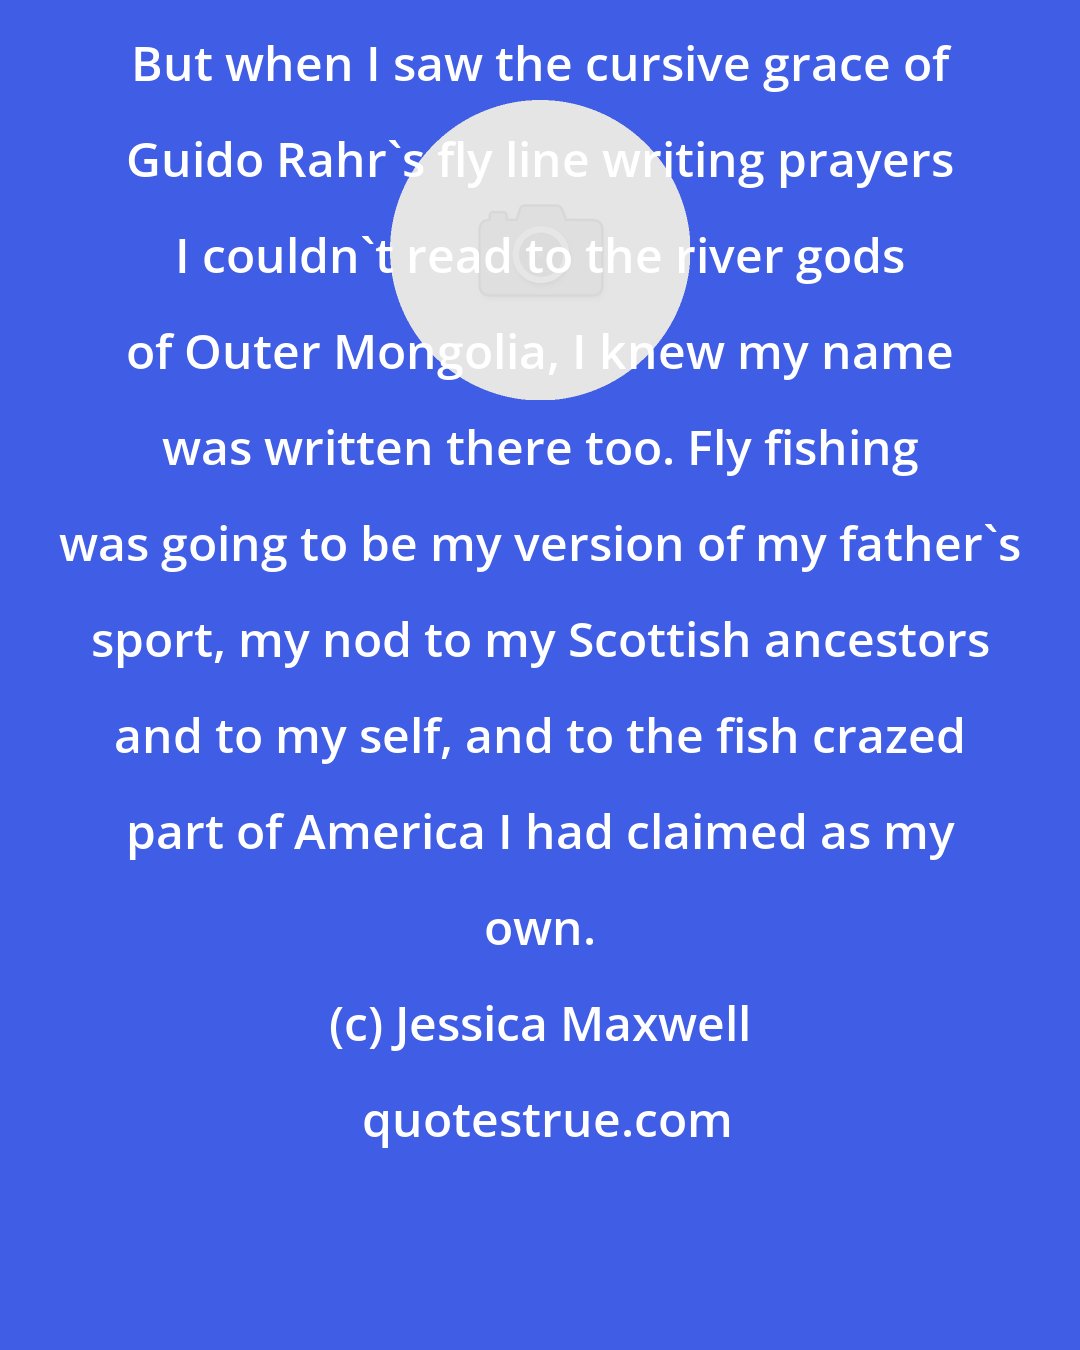 Jessica Maxwell: But when I saw the cursive grace of Guido Rahr's fly line writing prayers I couldn't read to the river gods of Outer Mongolia, I knew my name was written there too. Fly fishing was going to be my version of my father's sport, my nod to my Scottish ancestors and to my self, and to the fish crazed part of America I had claimed as my own.